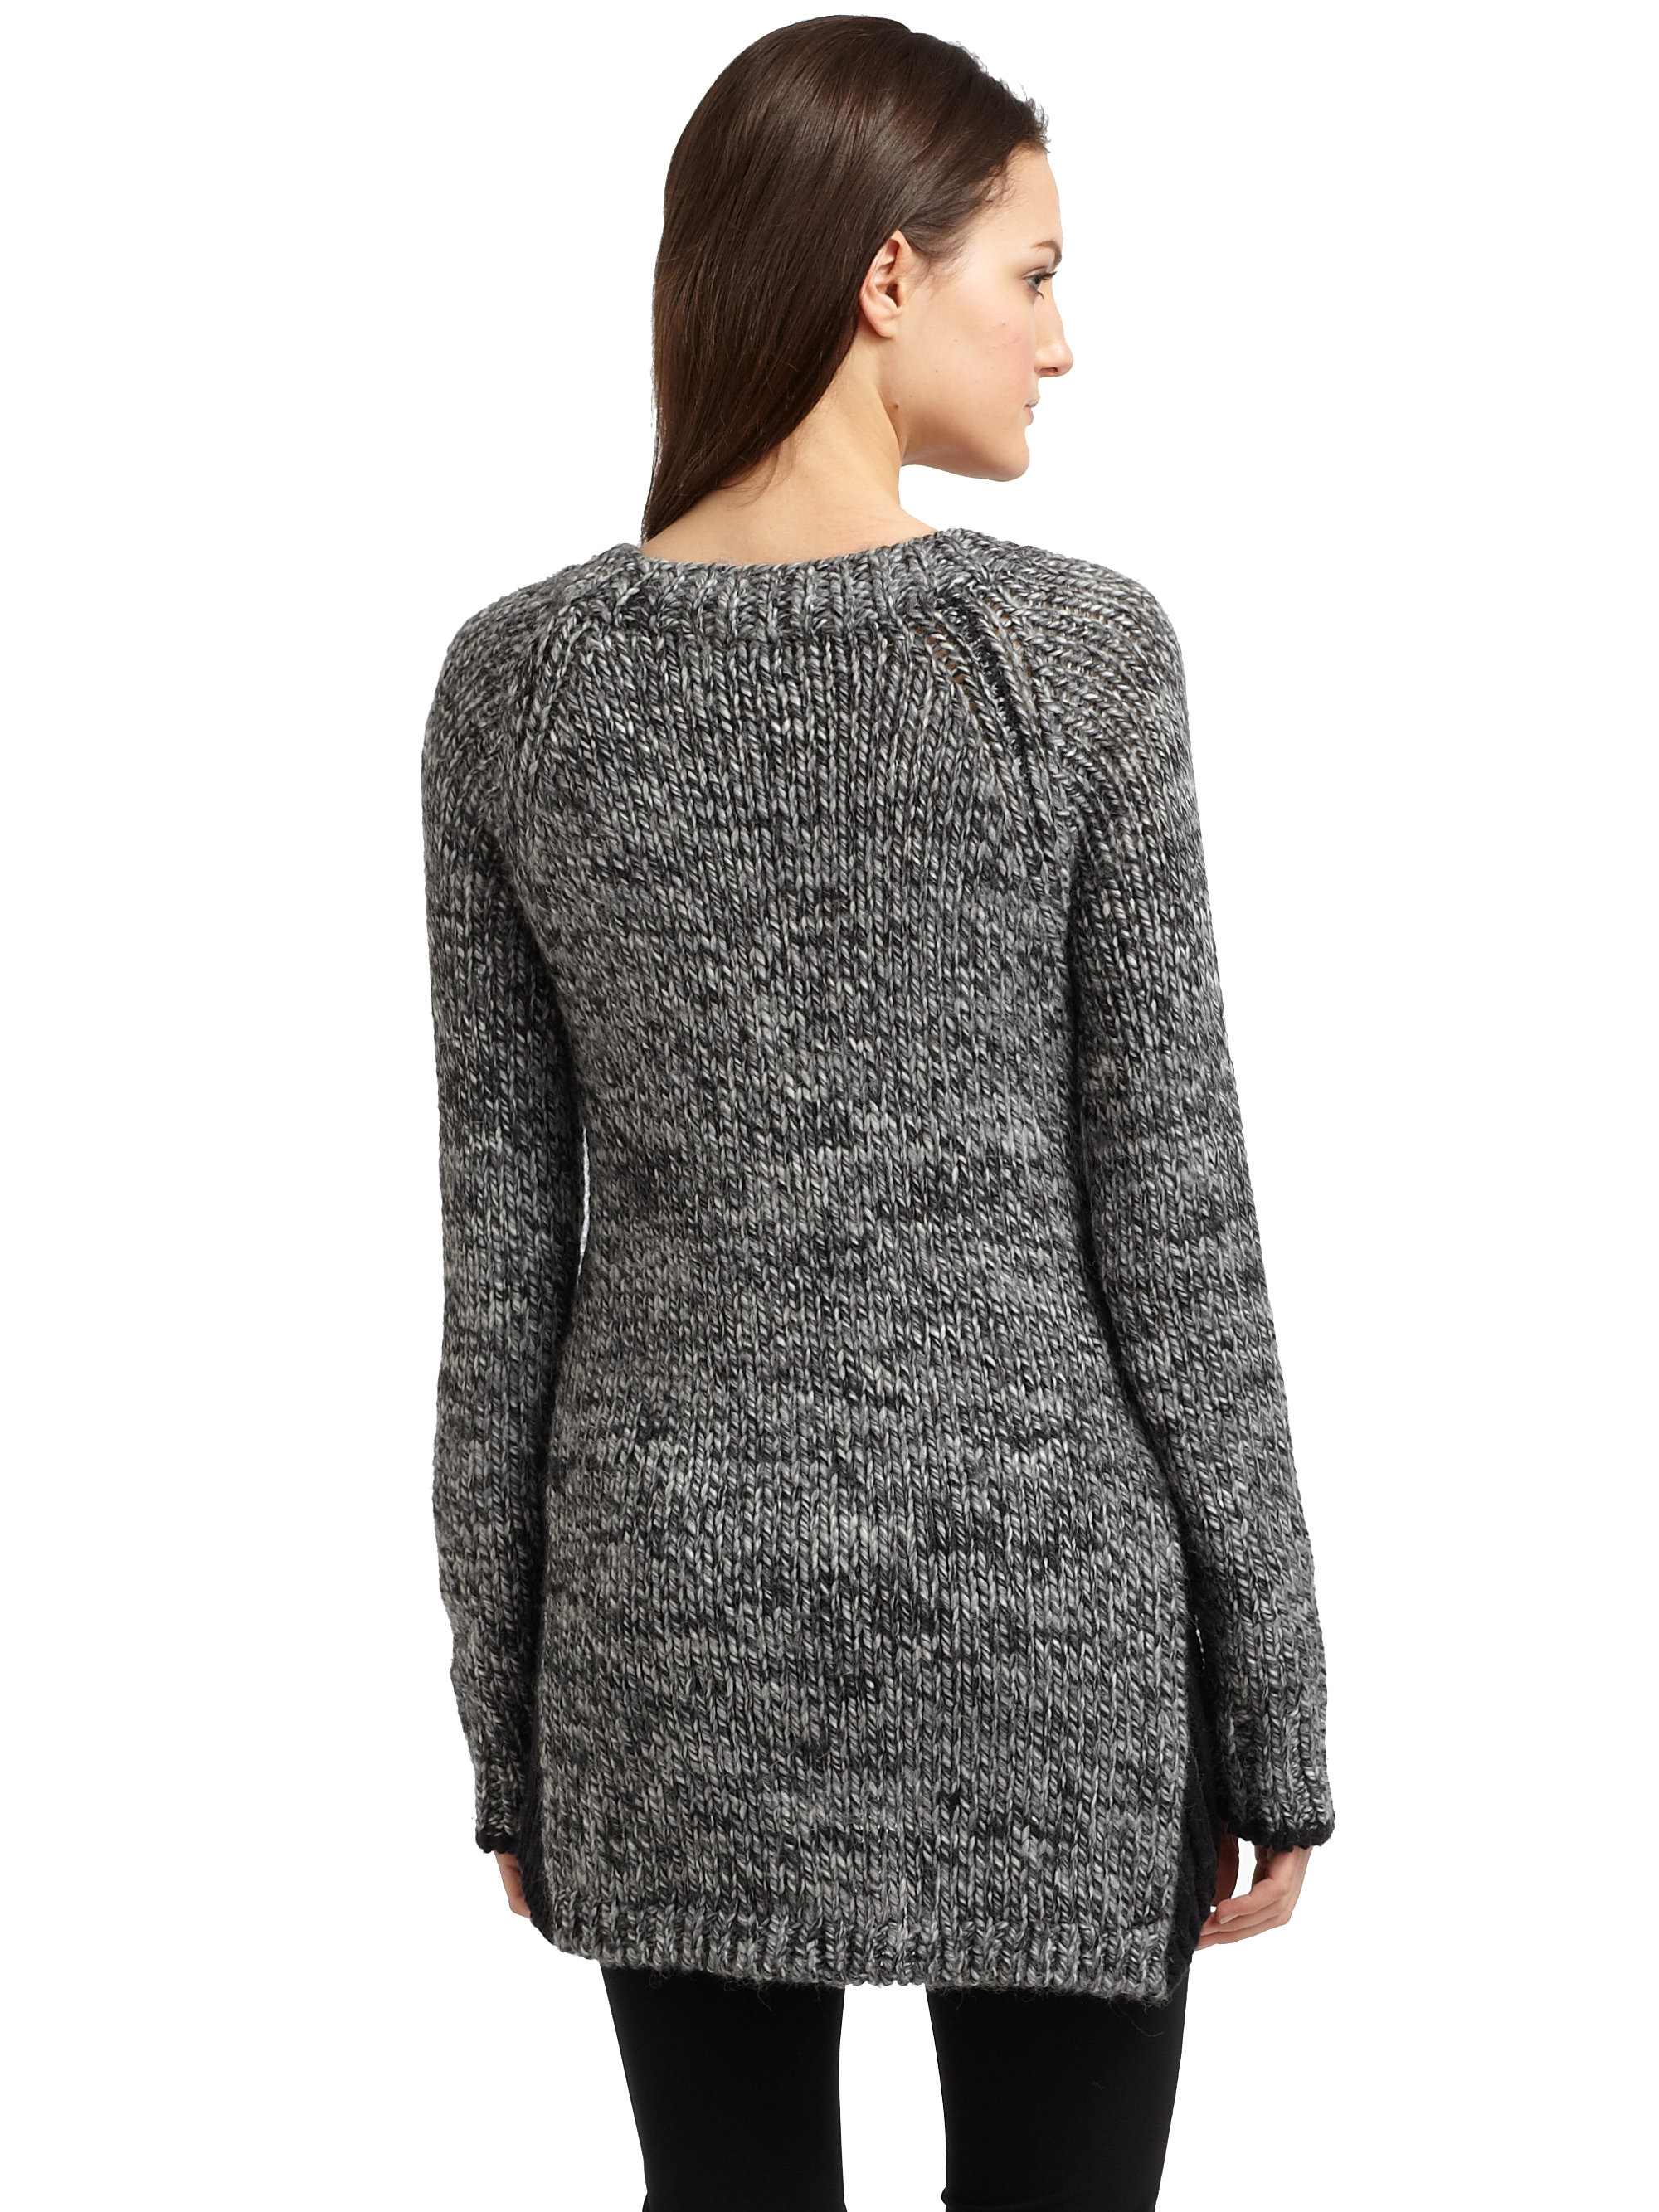 Elizabeth and james Marled Tunic Sweater in Gray | Lyst